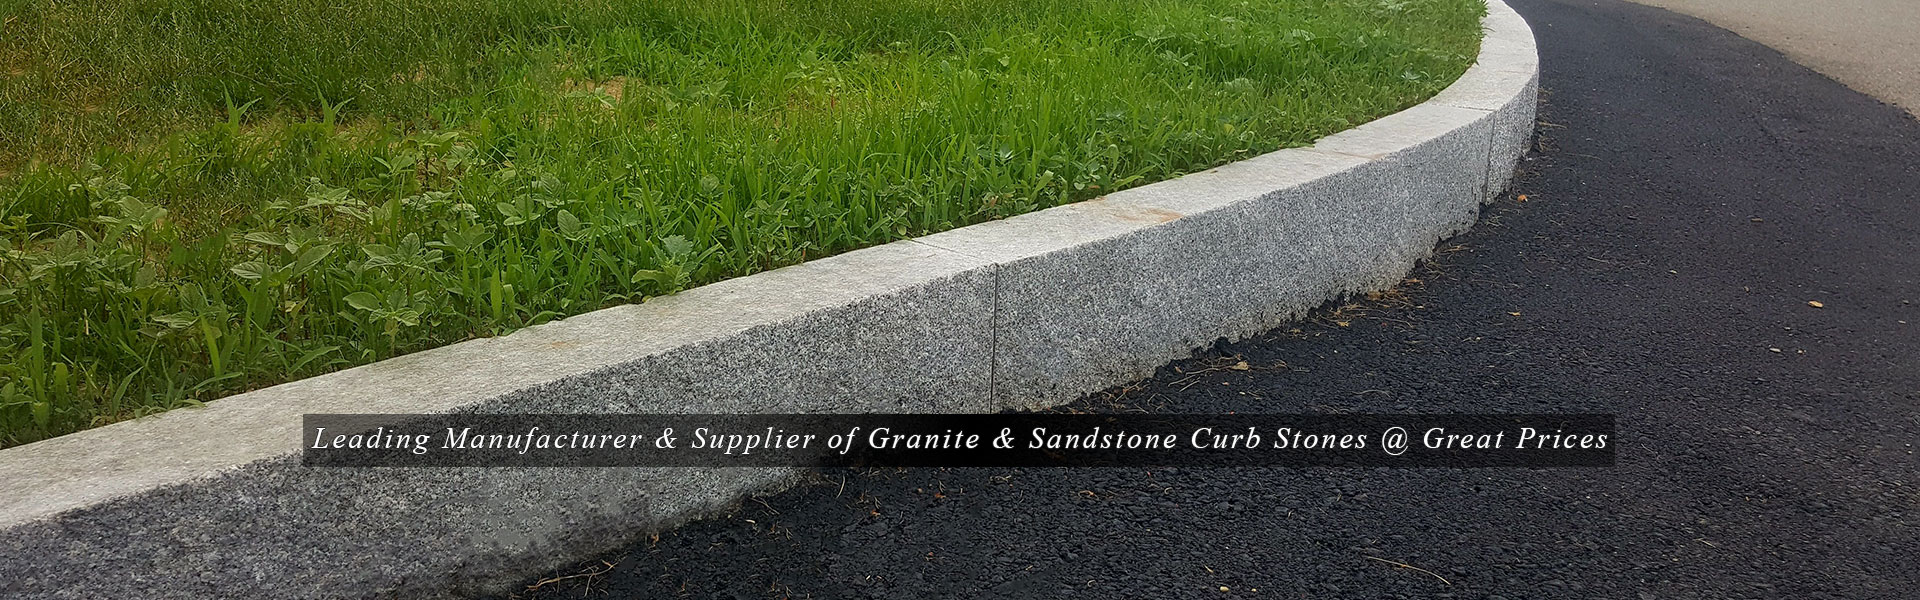 Curb Stone Suppliers in India